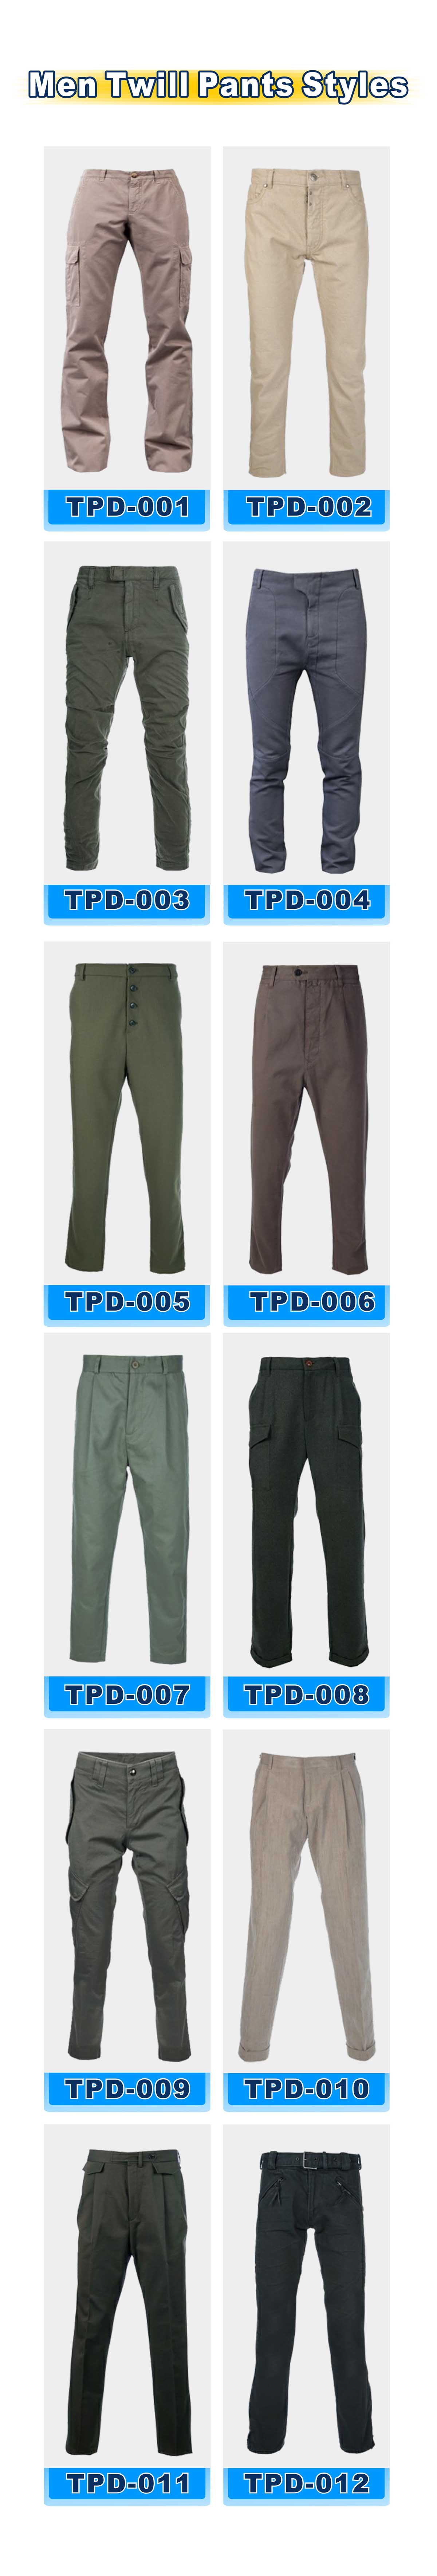 cargo pants style selection-20121124